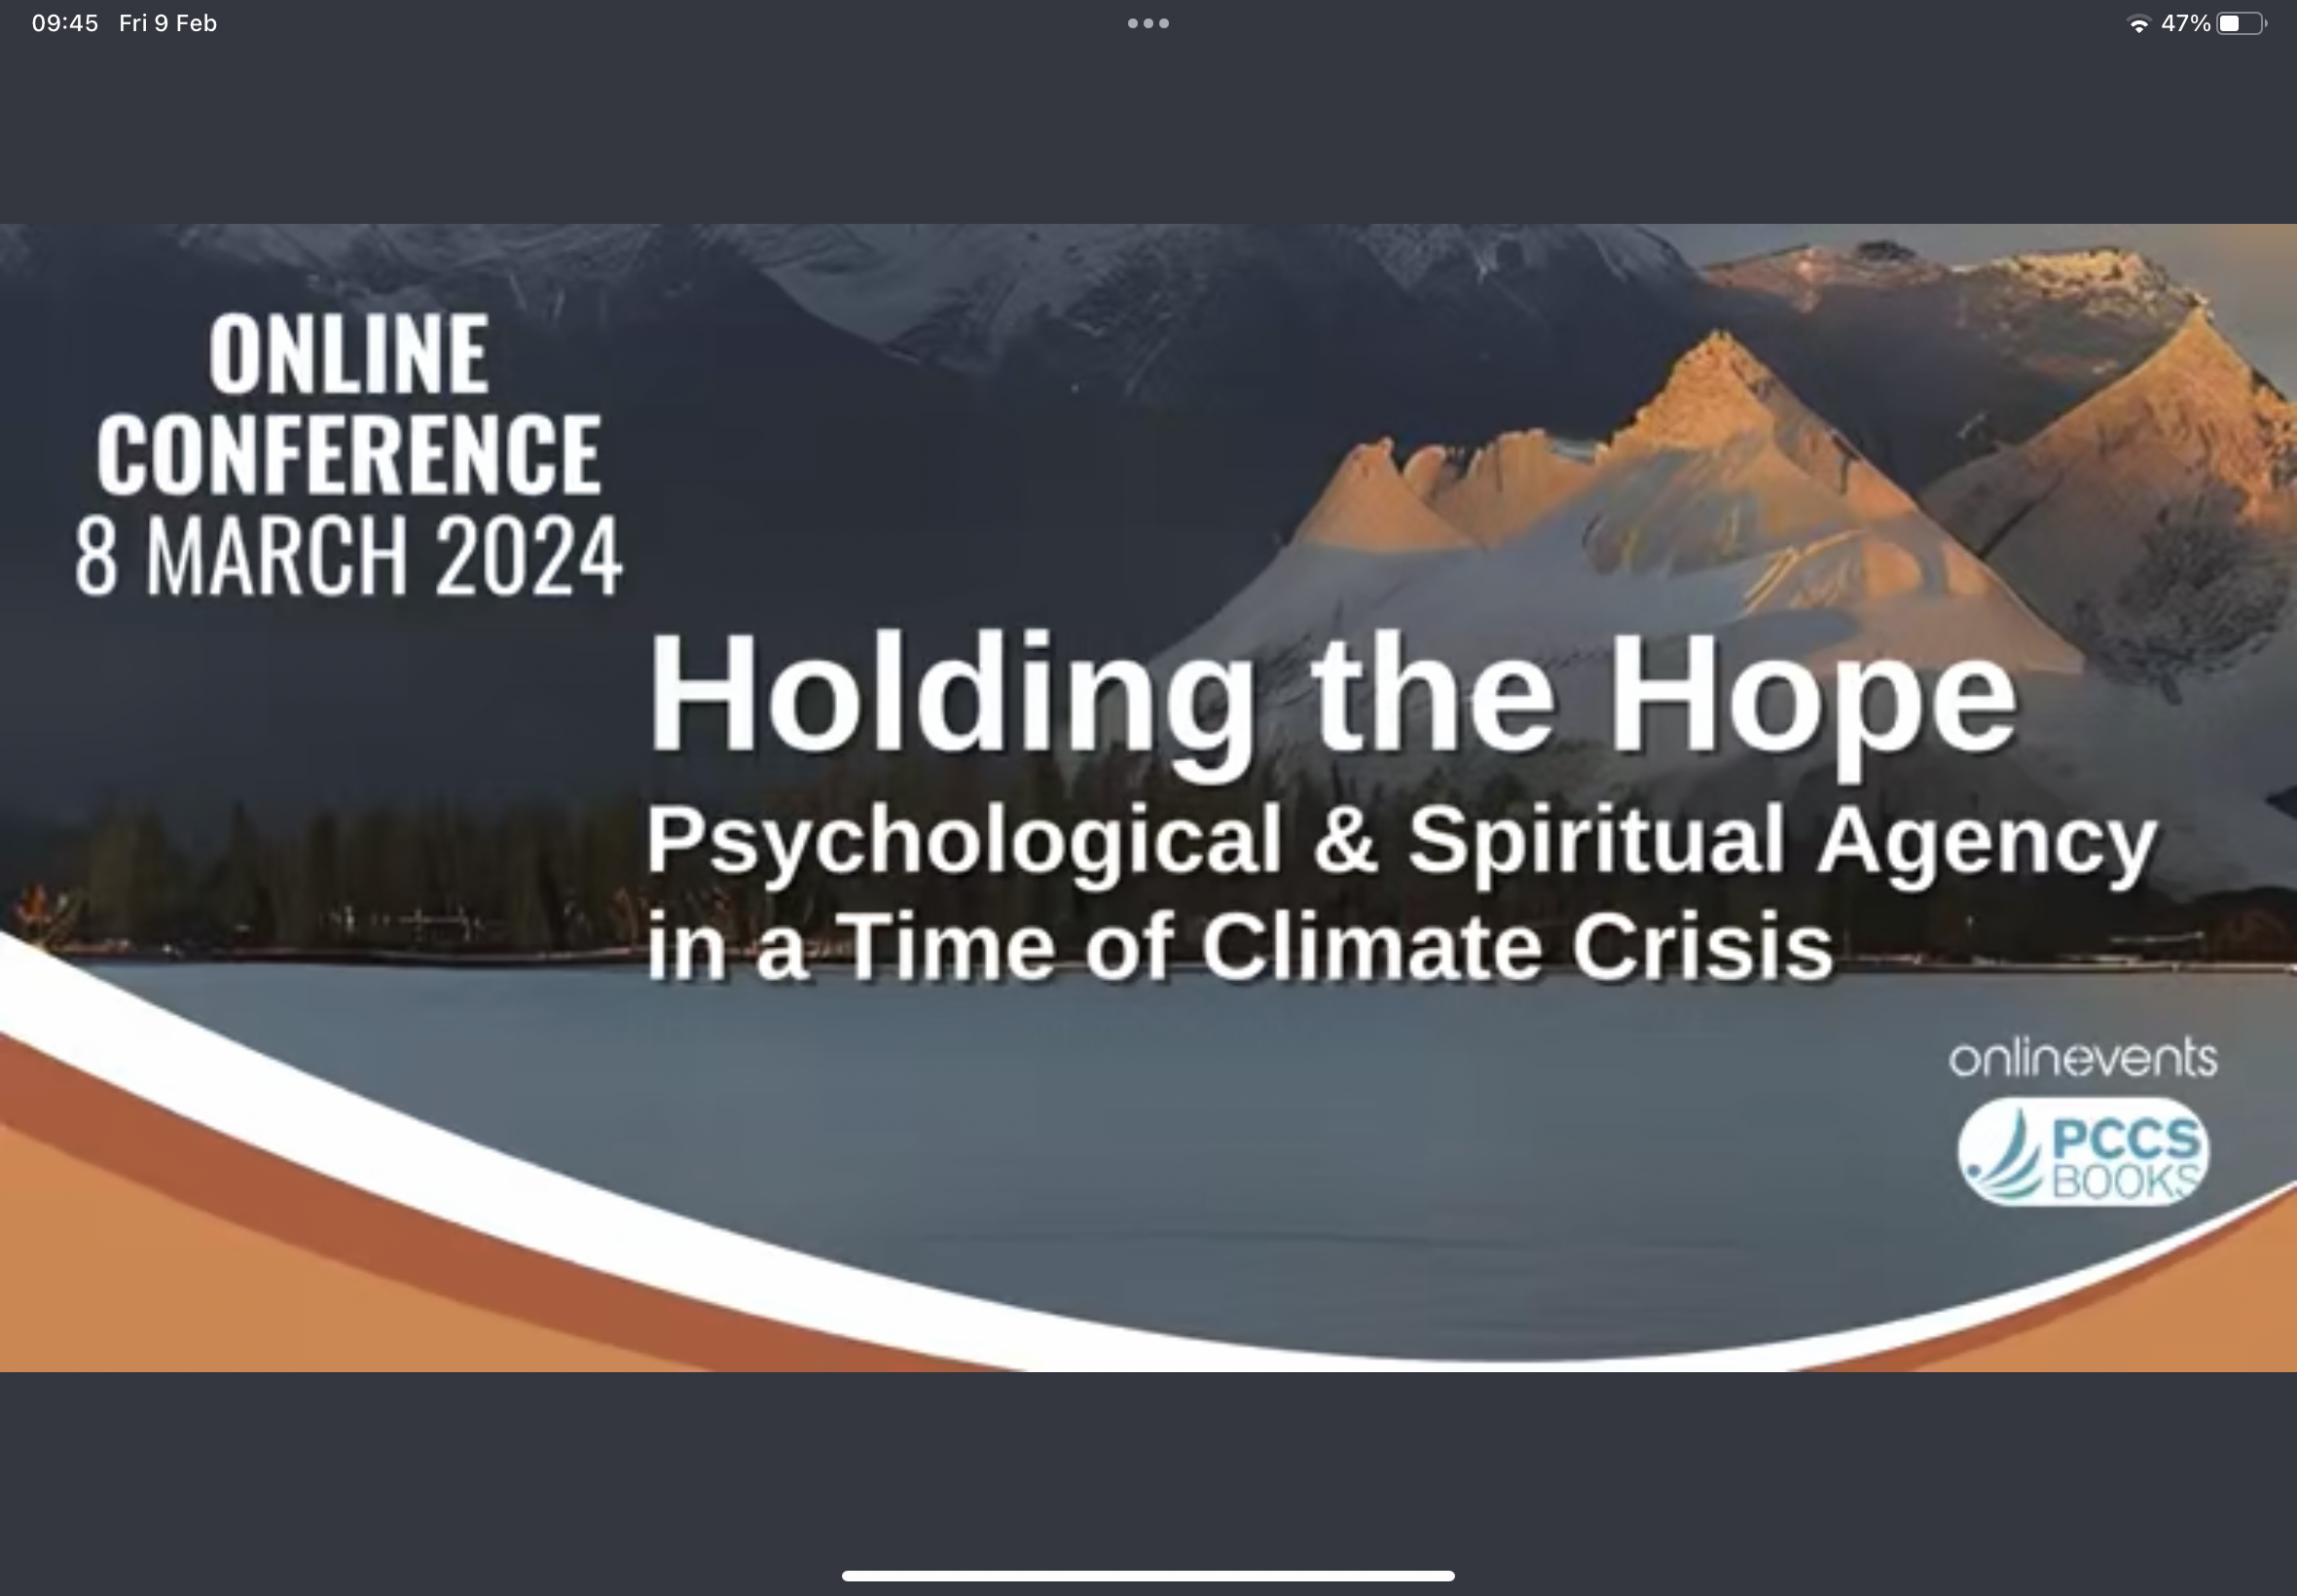 Holding the Hope: Psychological & Spiritual Agency in a Time of Climate Crisis